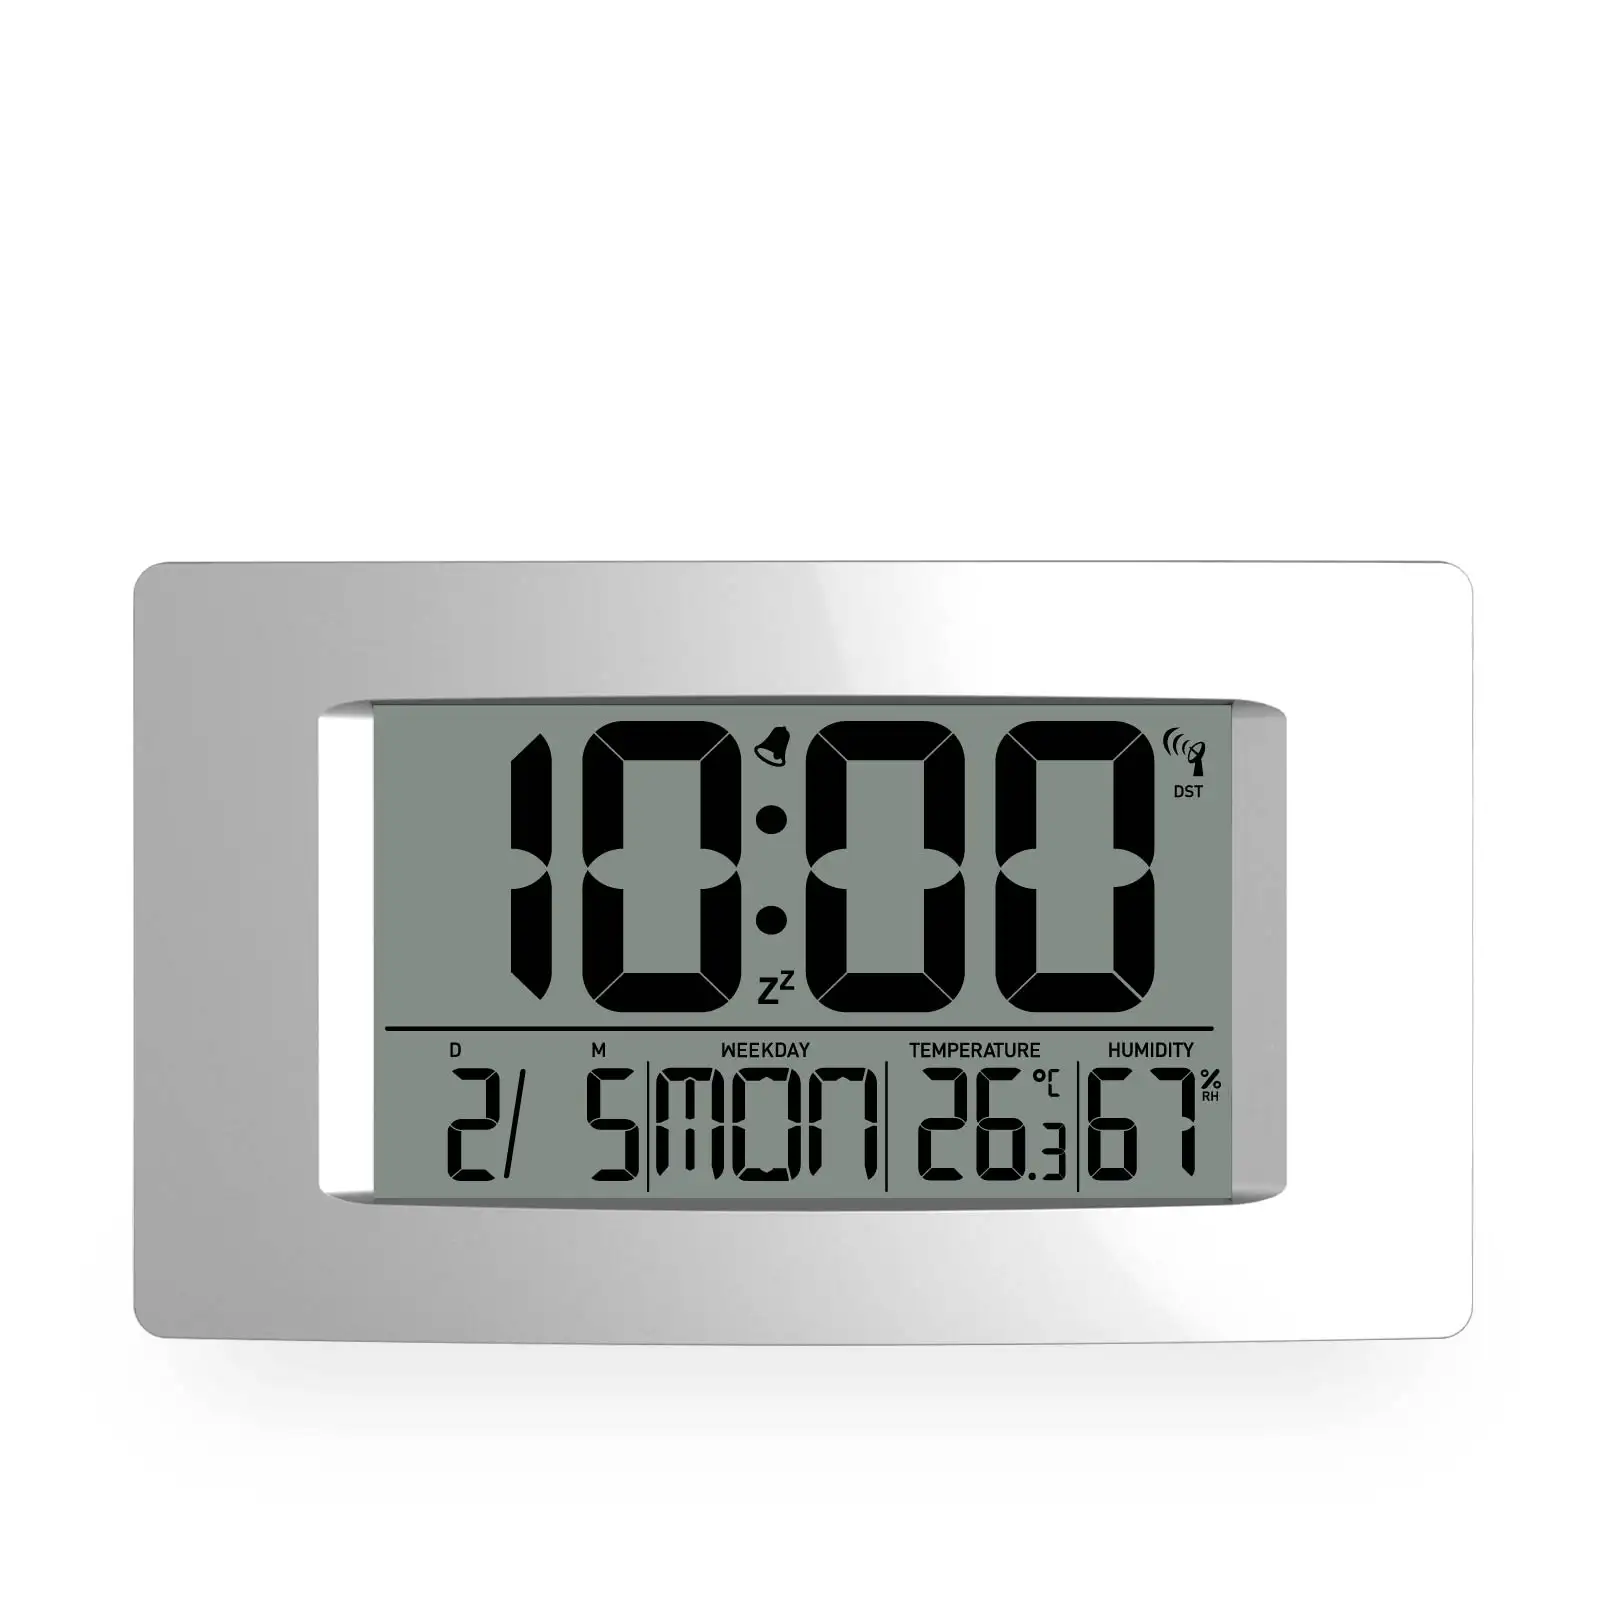 EWETIME Wall Clock Digital with Humidity and Temperature Digital Calendar Alarm Day Clock Square Indoor American Style CE /ROHS